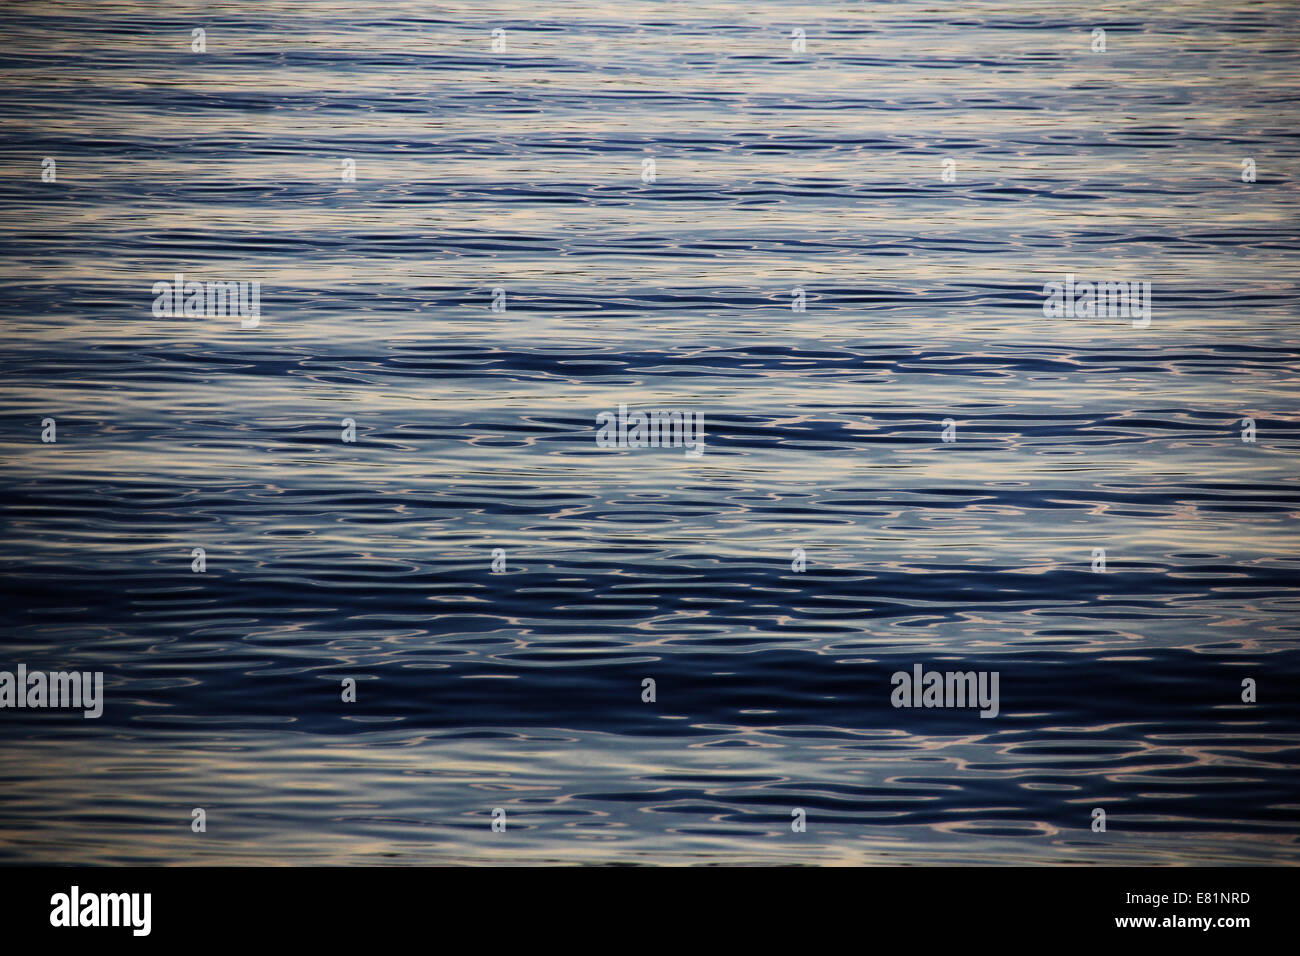 Uniform water waves, Lake Constance, Germany Stock Photo